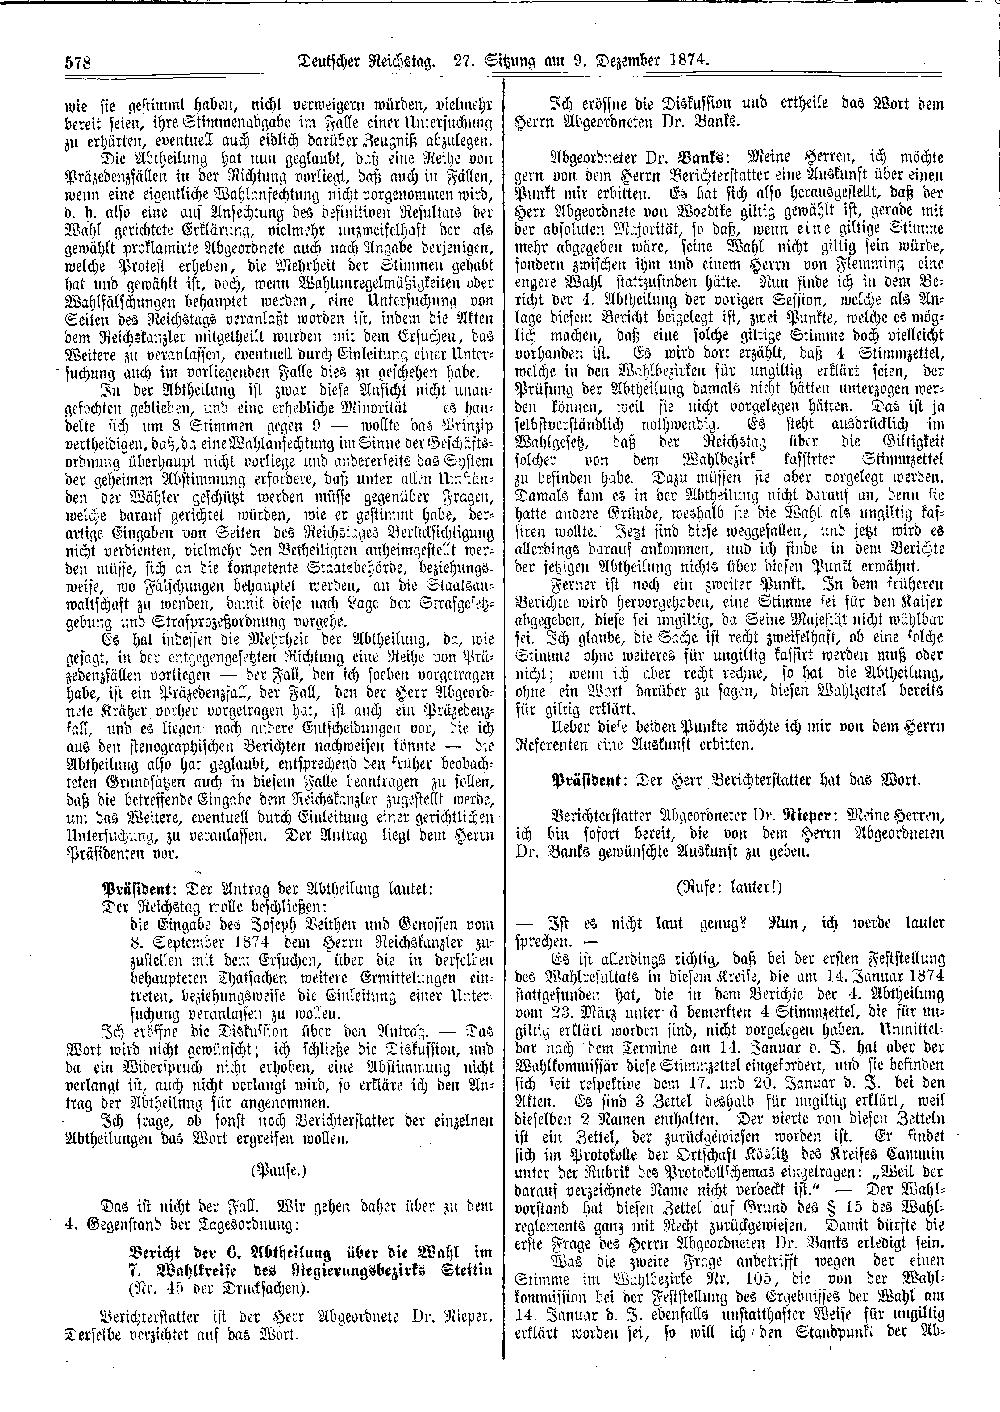 Scan of page 578